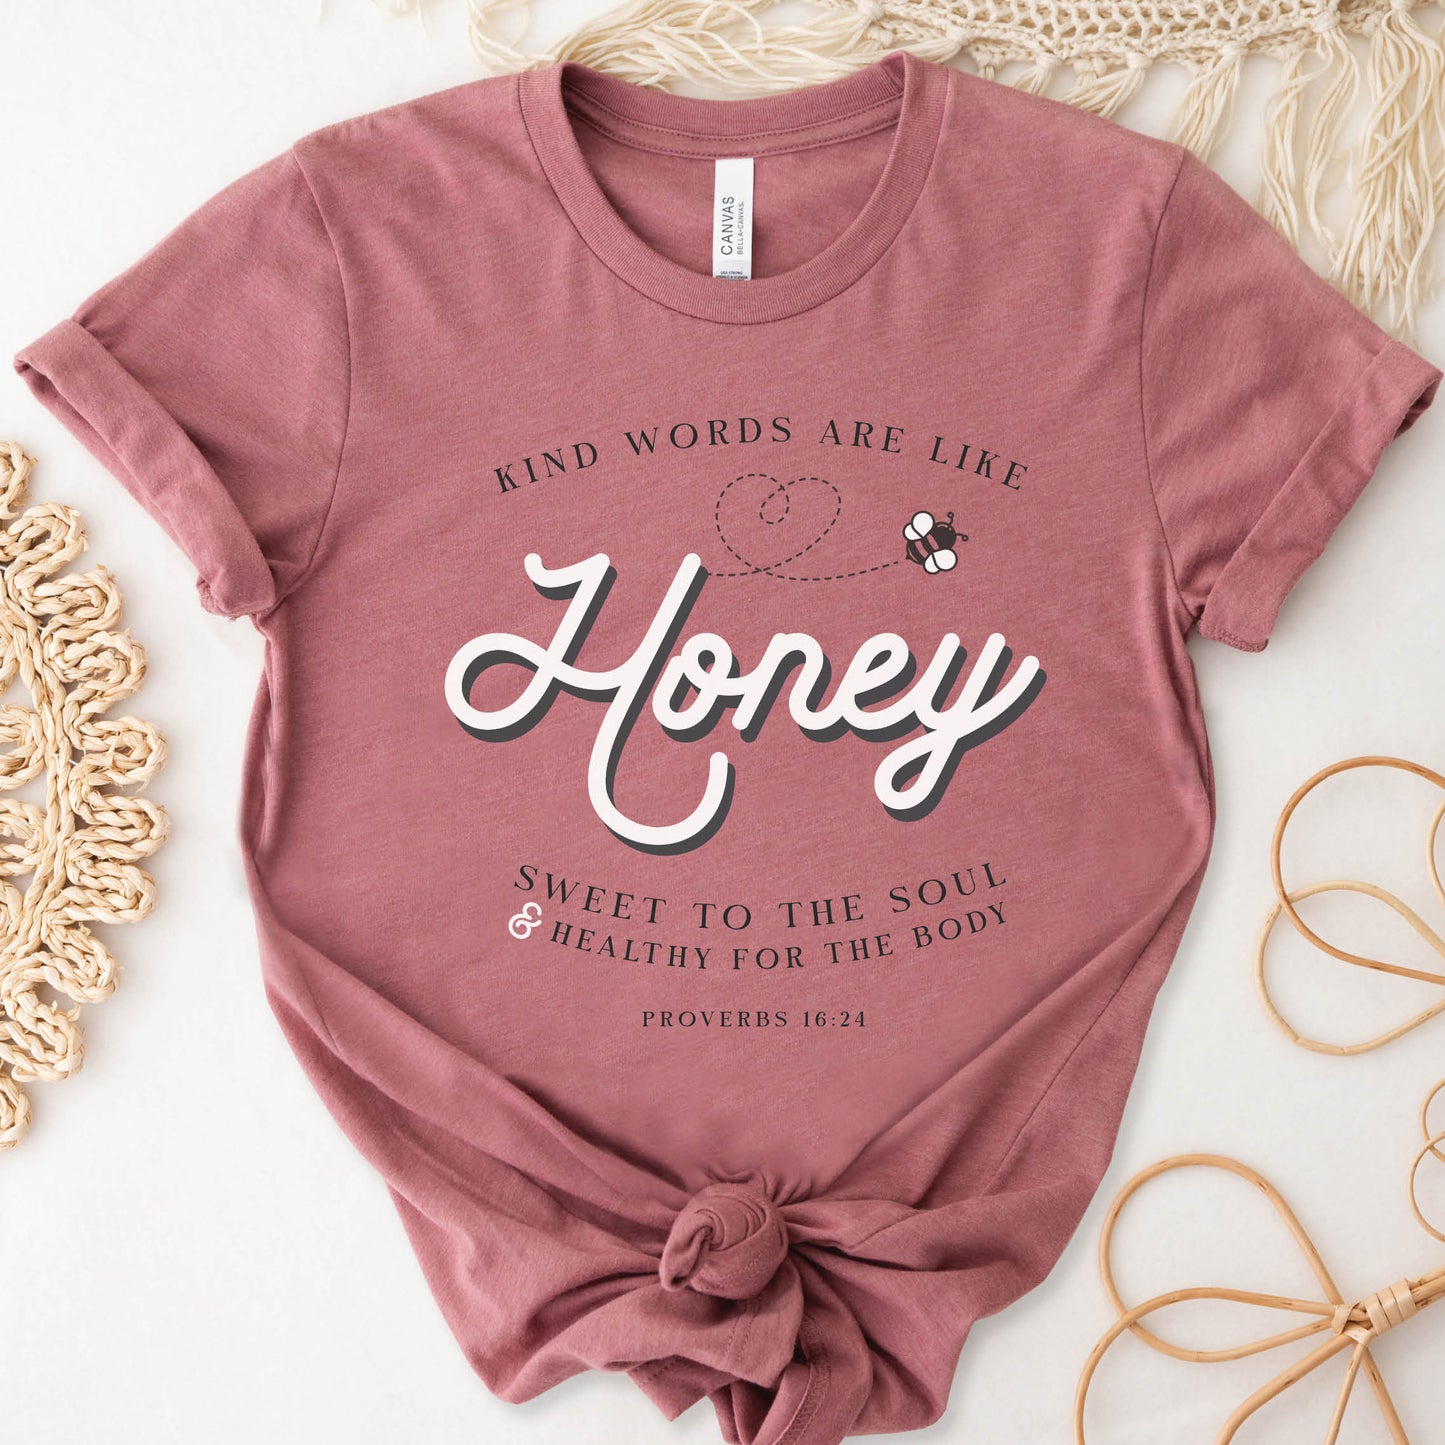 Mauve & gold Christian aesthetic unisex faith-based kindness bee t-shirt for women with Proverbs 16:24 bible verse quote that says, "Kind Words Are Like Honey, Sweet To the Soul, and Healthy For the Body" 